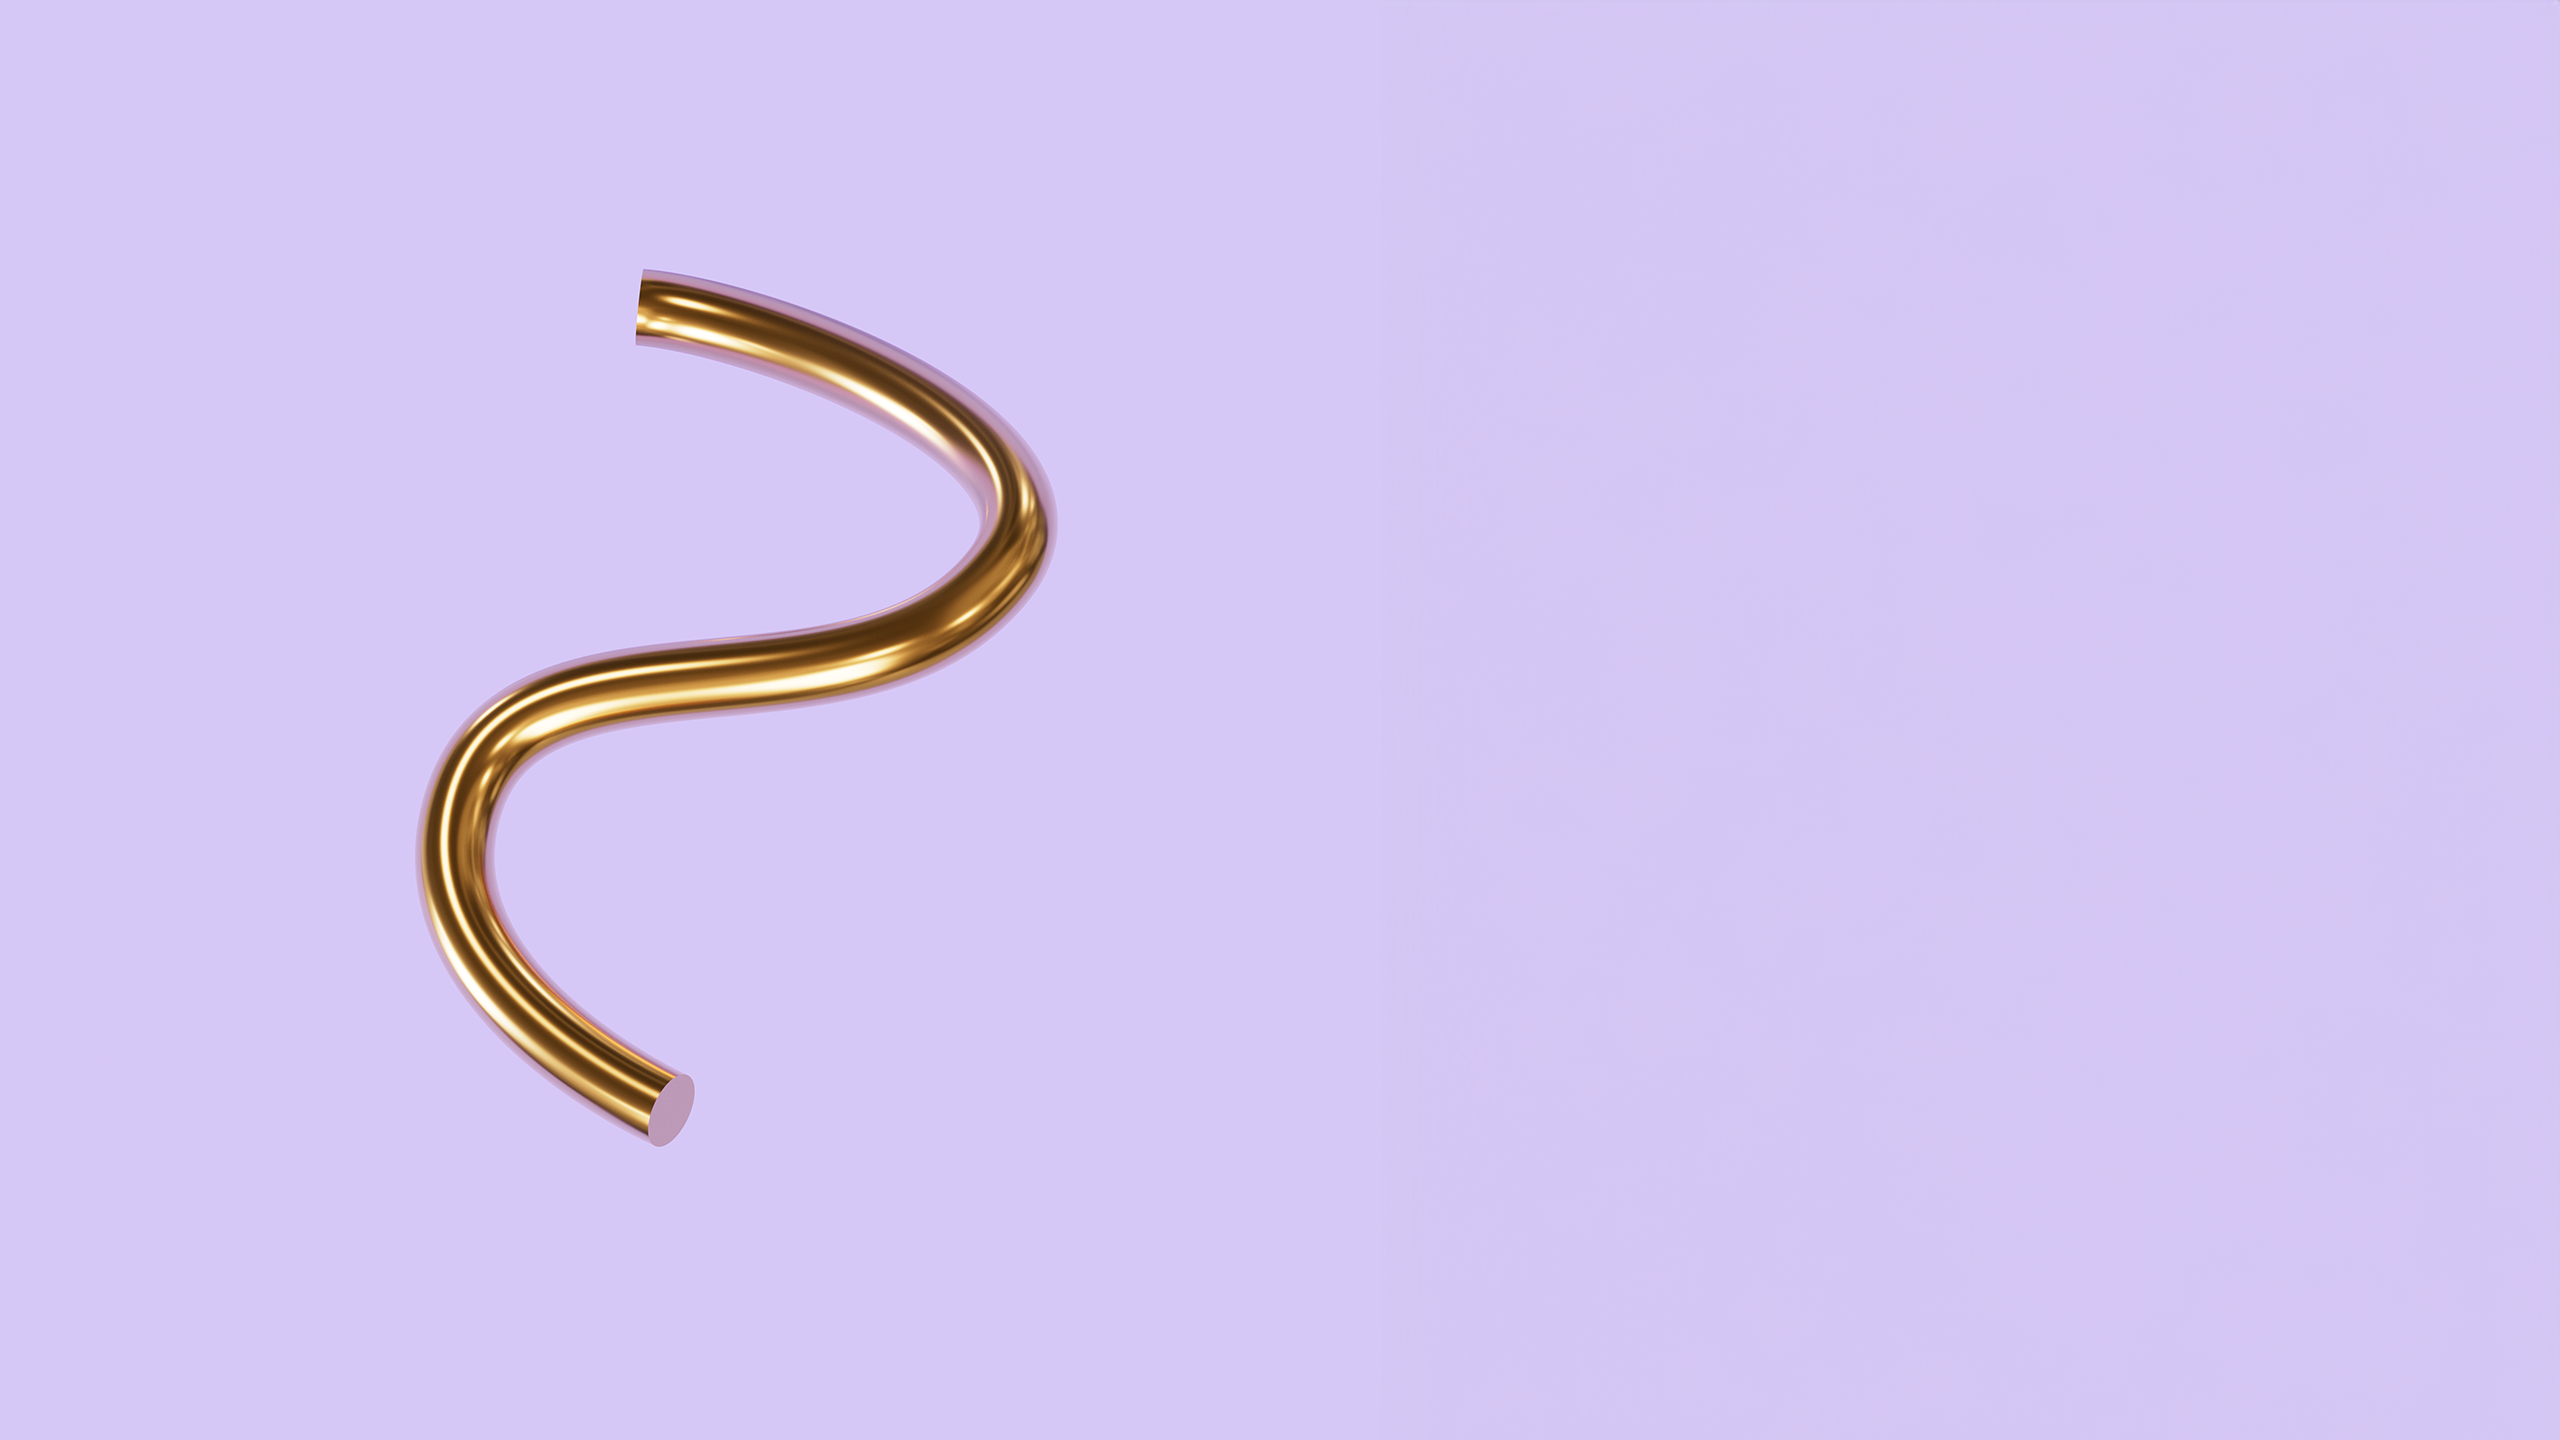 A shiny gold bar shaped into a reverse letter S, on a lilac background 